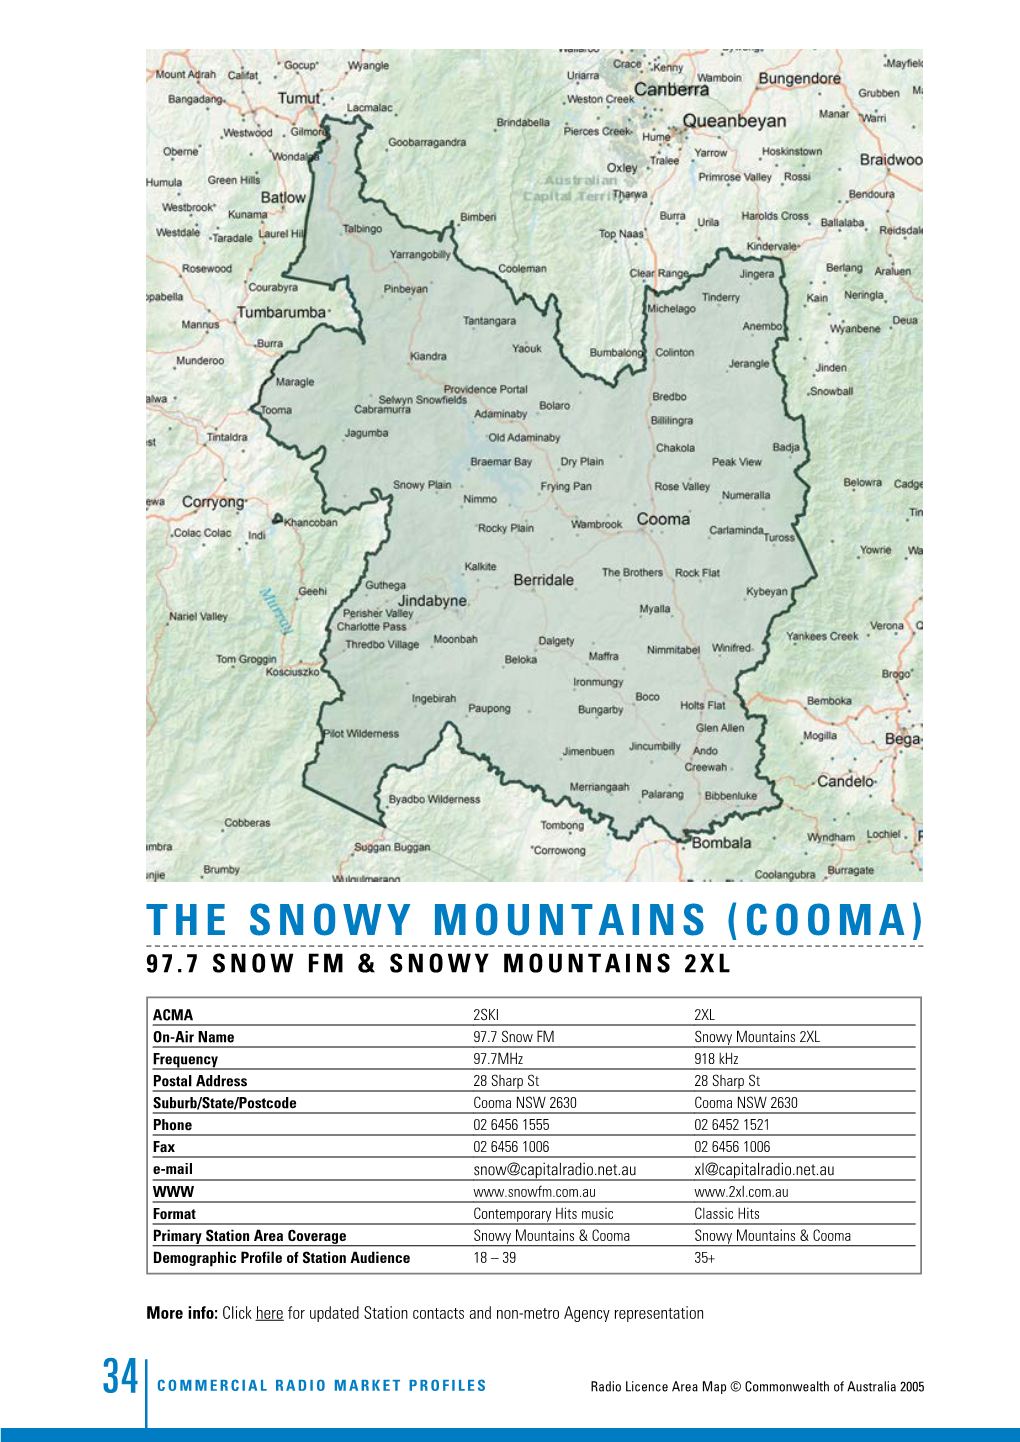 The Snowy Mountains (Cooma) 97.7 SNOW FM & SNOWY MOUNTAINS 2XL